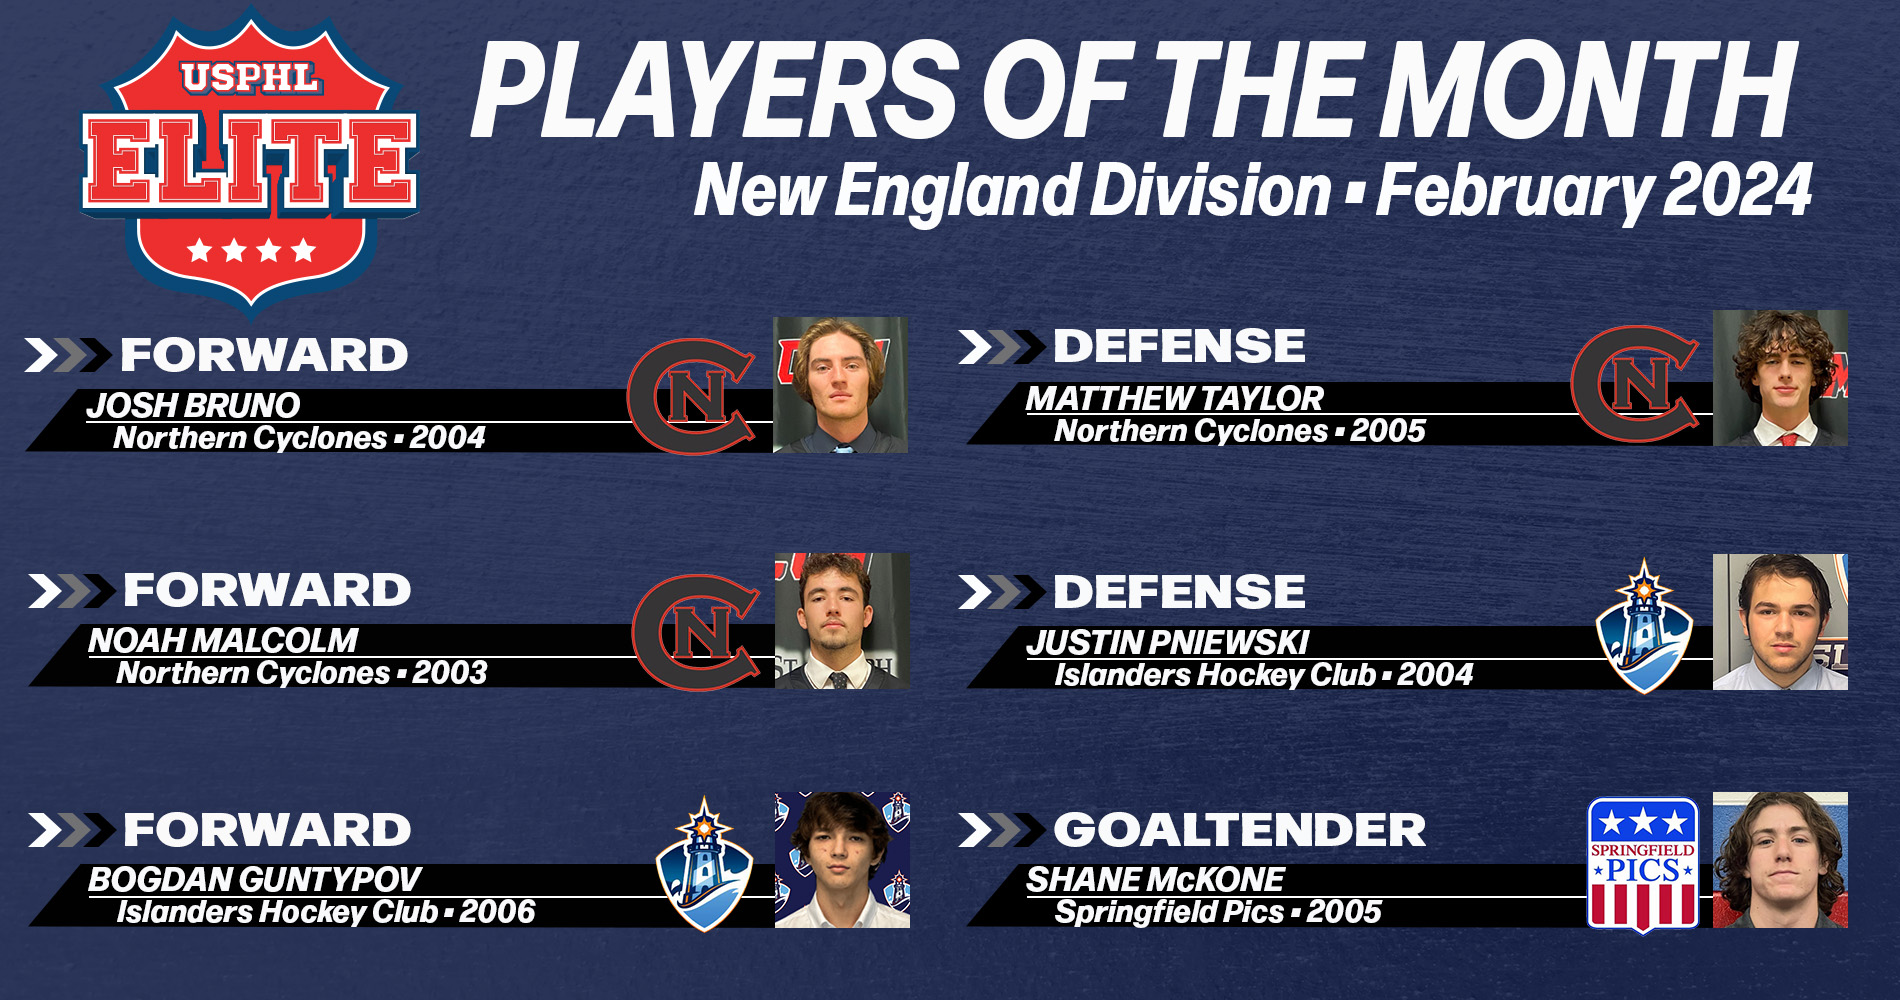 USPHL Elite 2023-24 New England Division Players Of The Month: February 2024